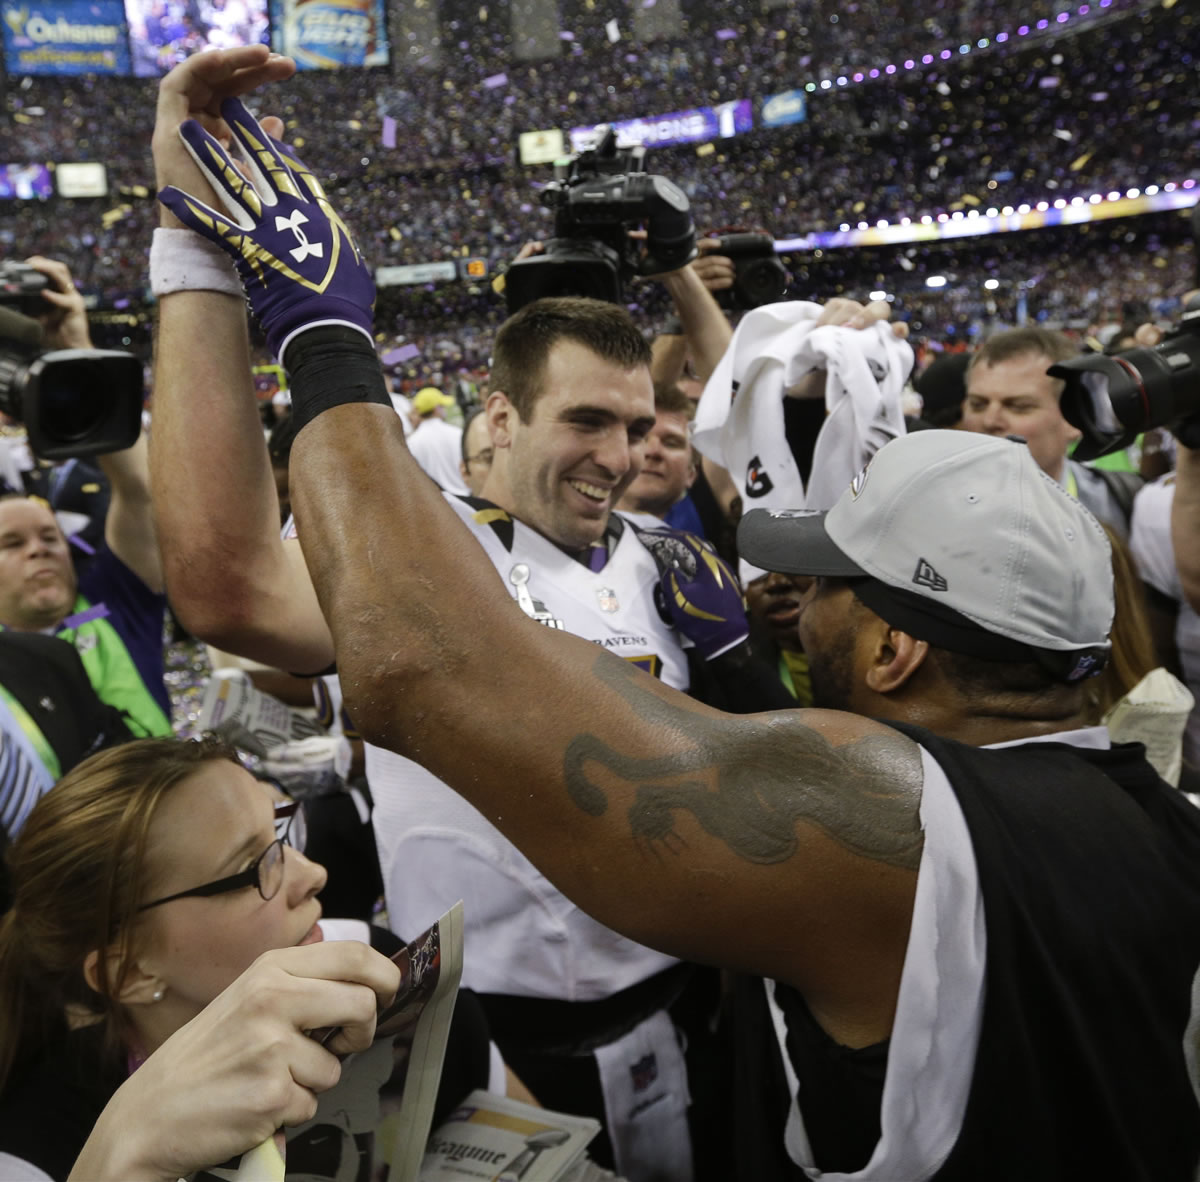 Baltimore Ravens quarterback Joe Flacco, left, and linebacker Ray Lewis celebrate their 34-31 win against the San Francisco 49ers in the NFL Super Bowl XLVII.